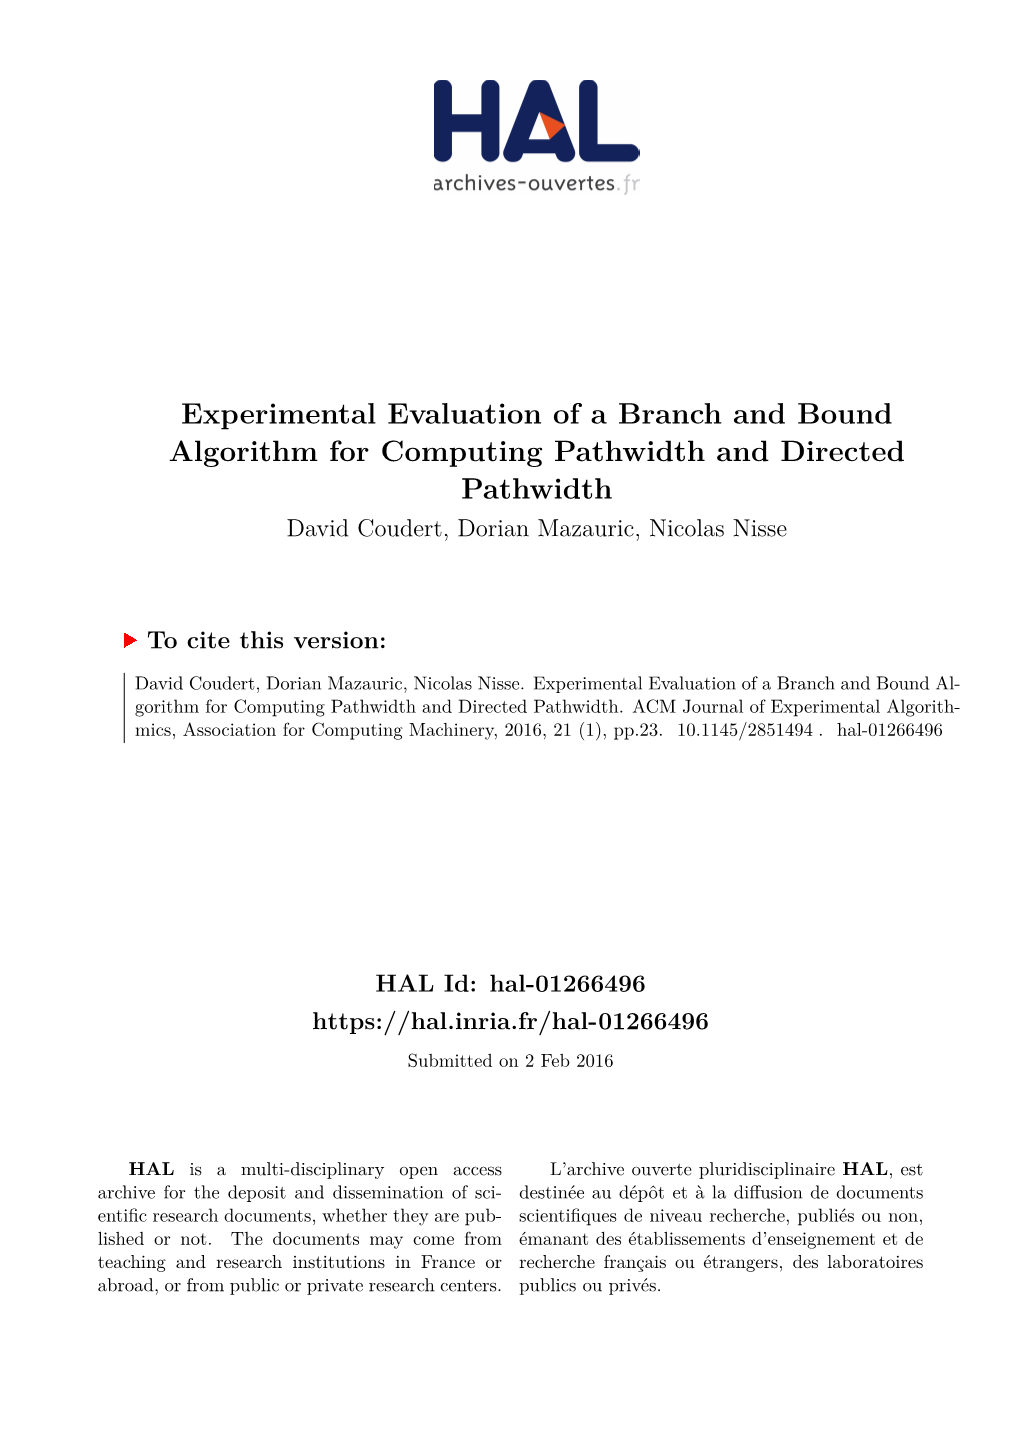 Experimental Evaluation of a Branch and Bound Algorithm for Computing Pathwidth and Directed Pathwidth David Coudert, Dorian Mazauric, Nicolas Nisse